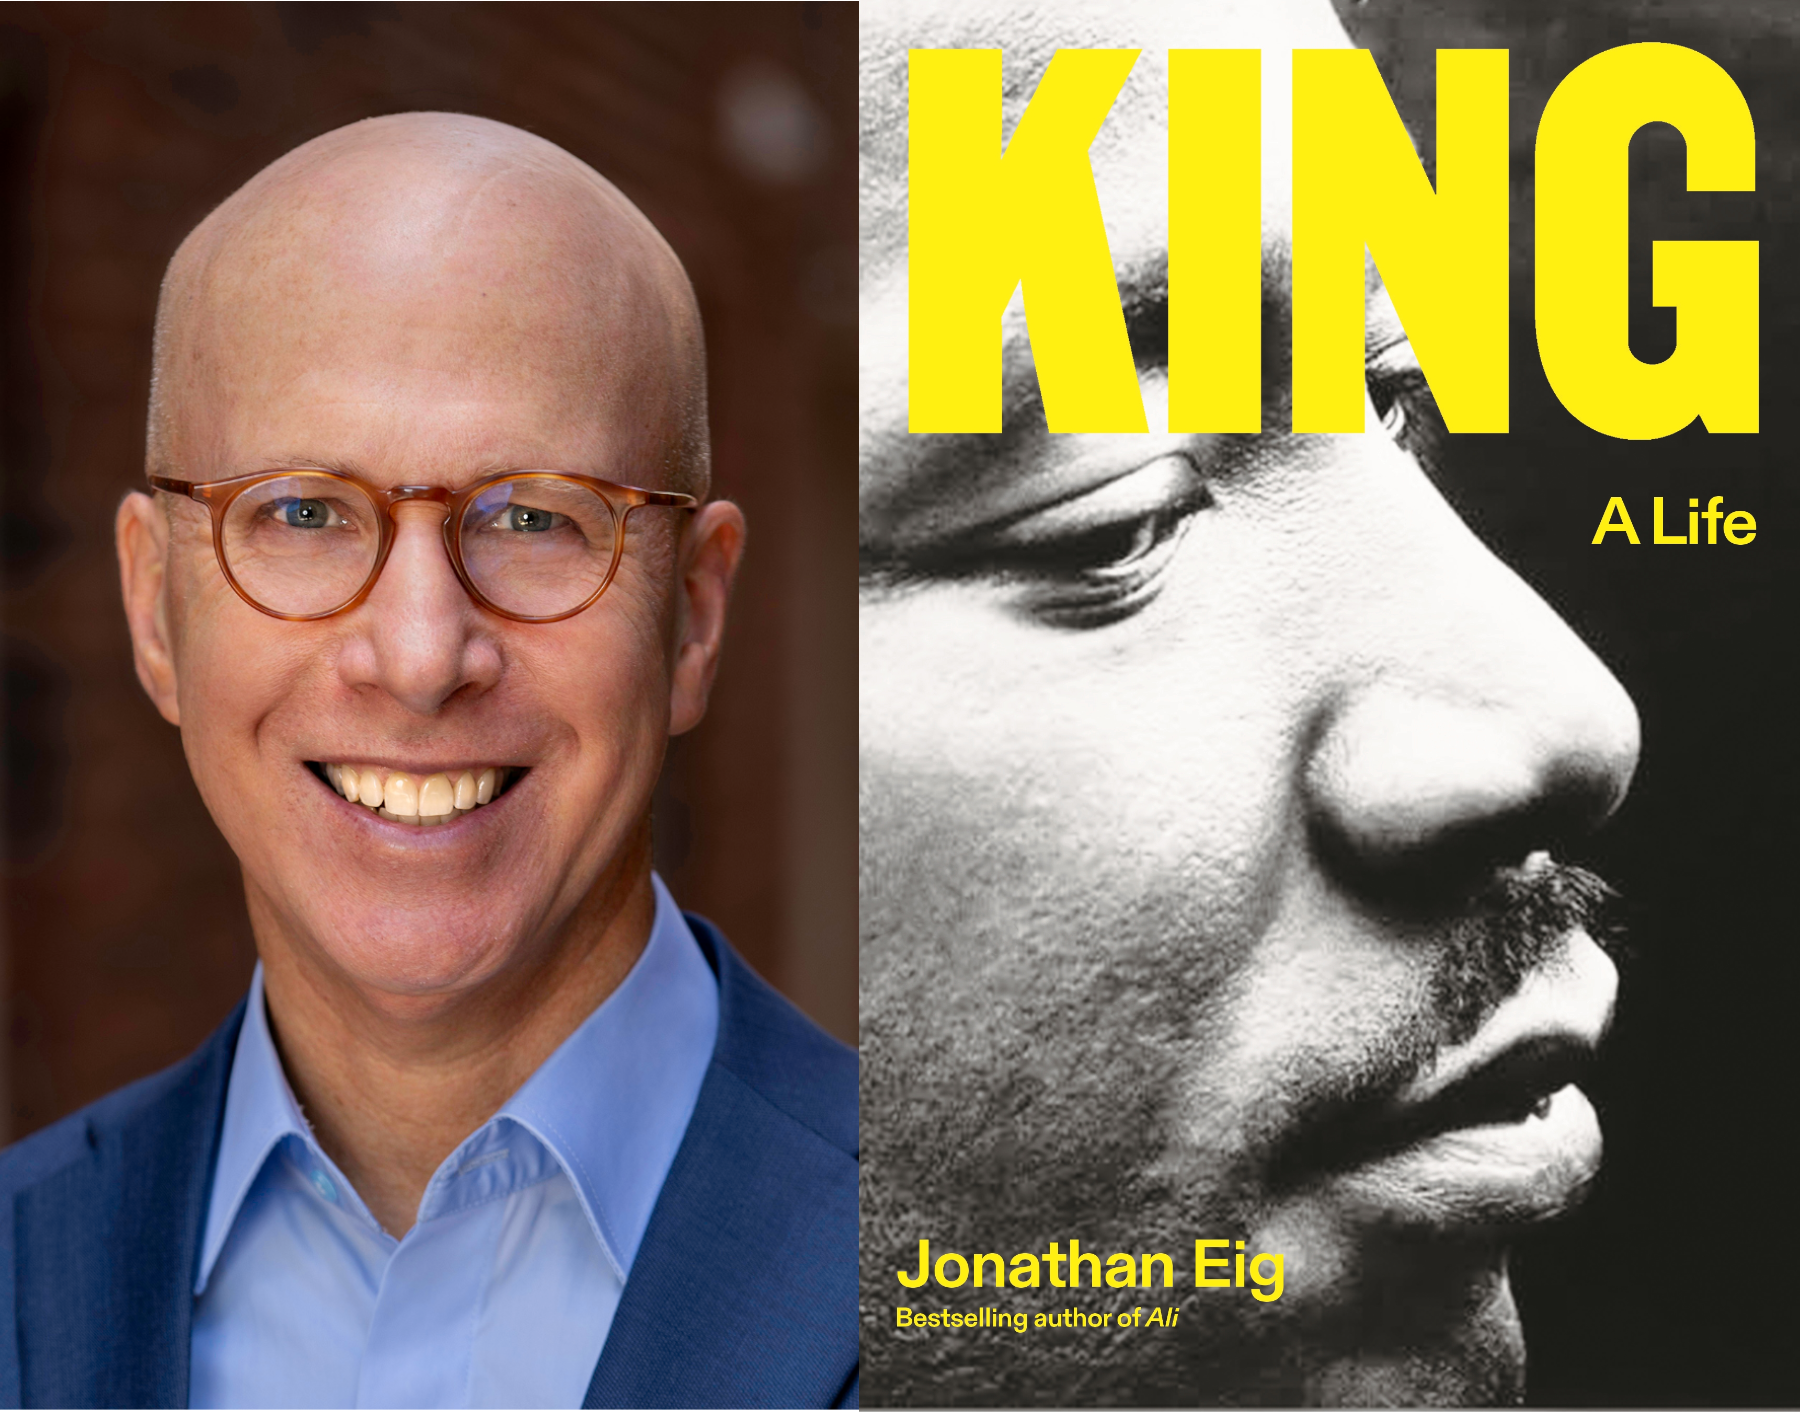 "King: A Life": A compelling new portrait of the social justice icon